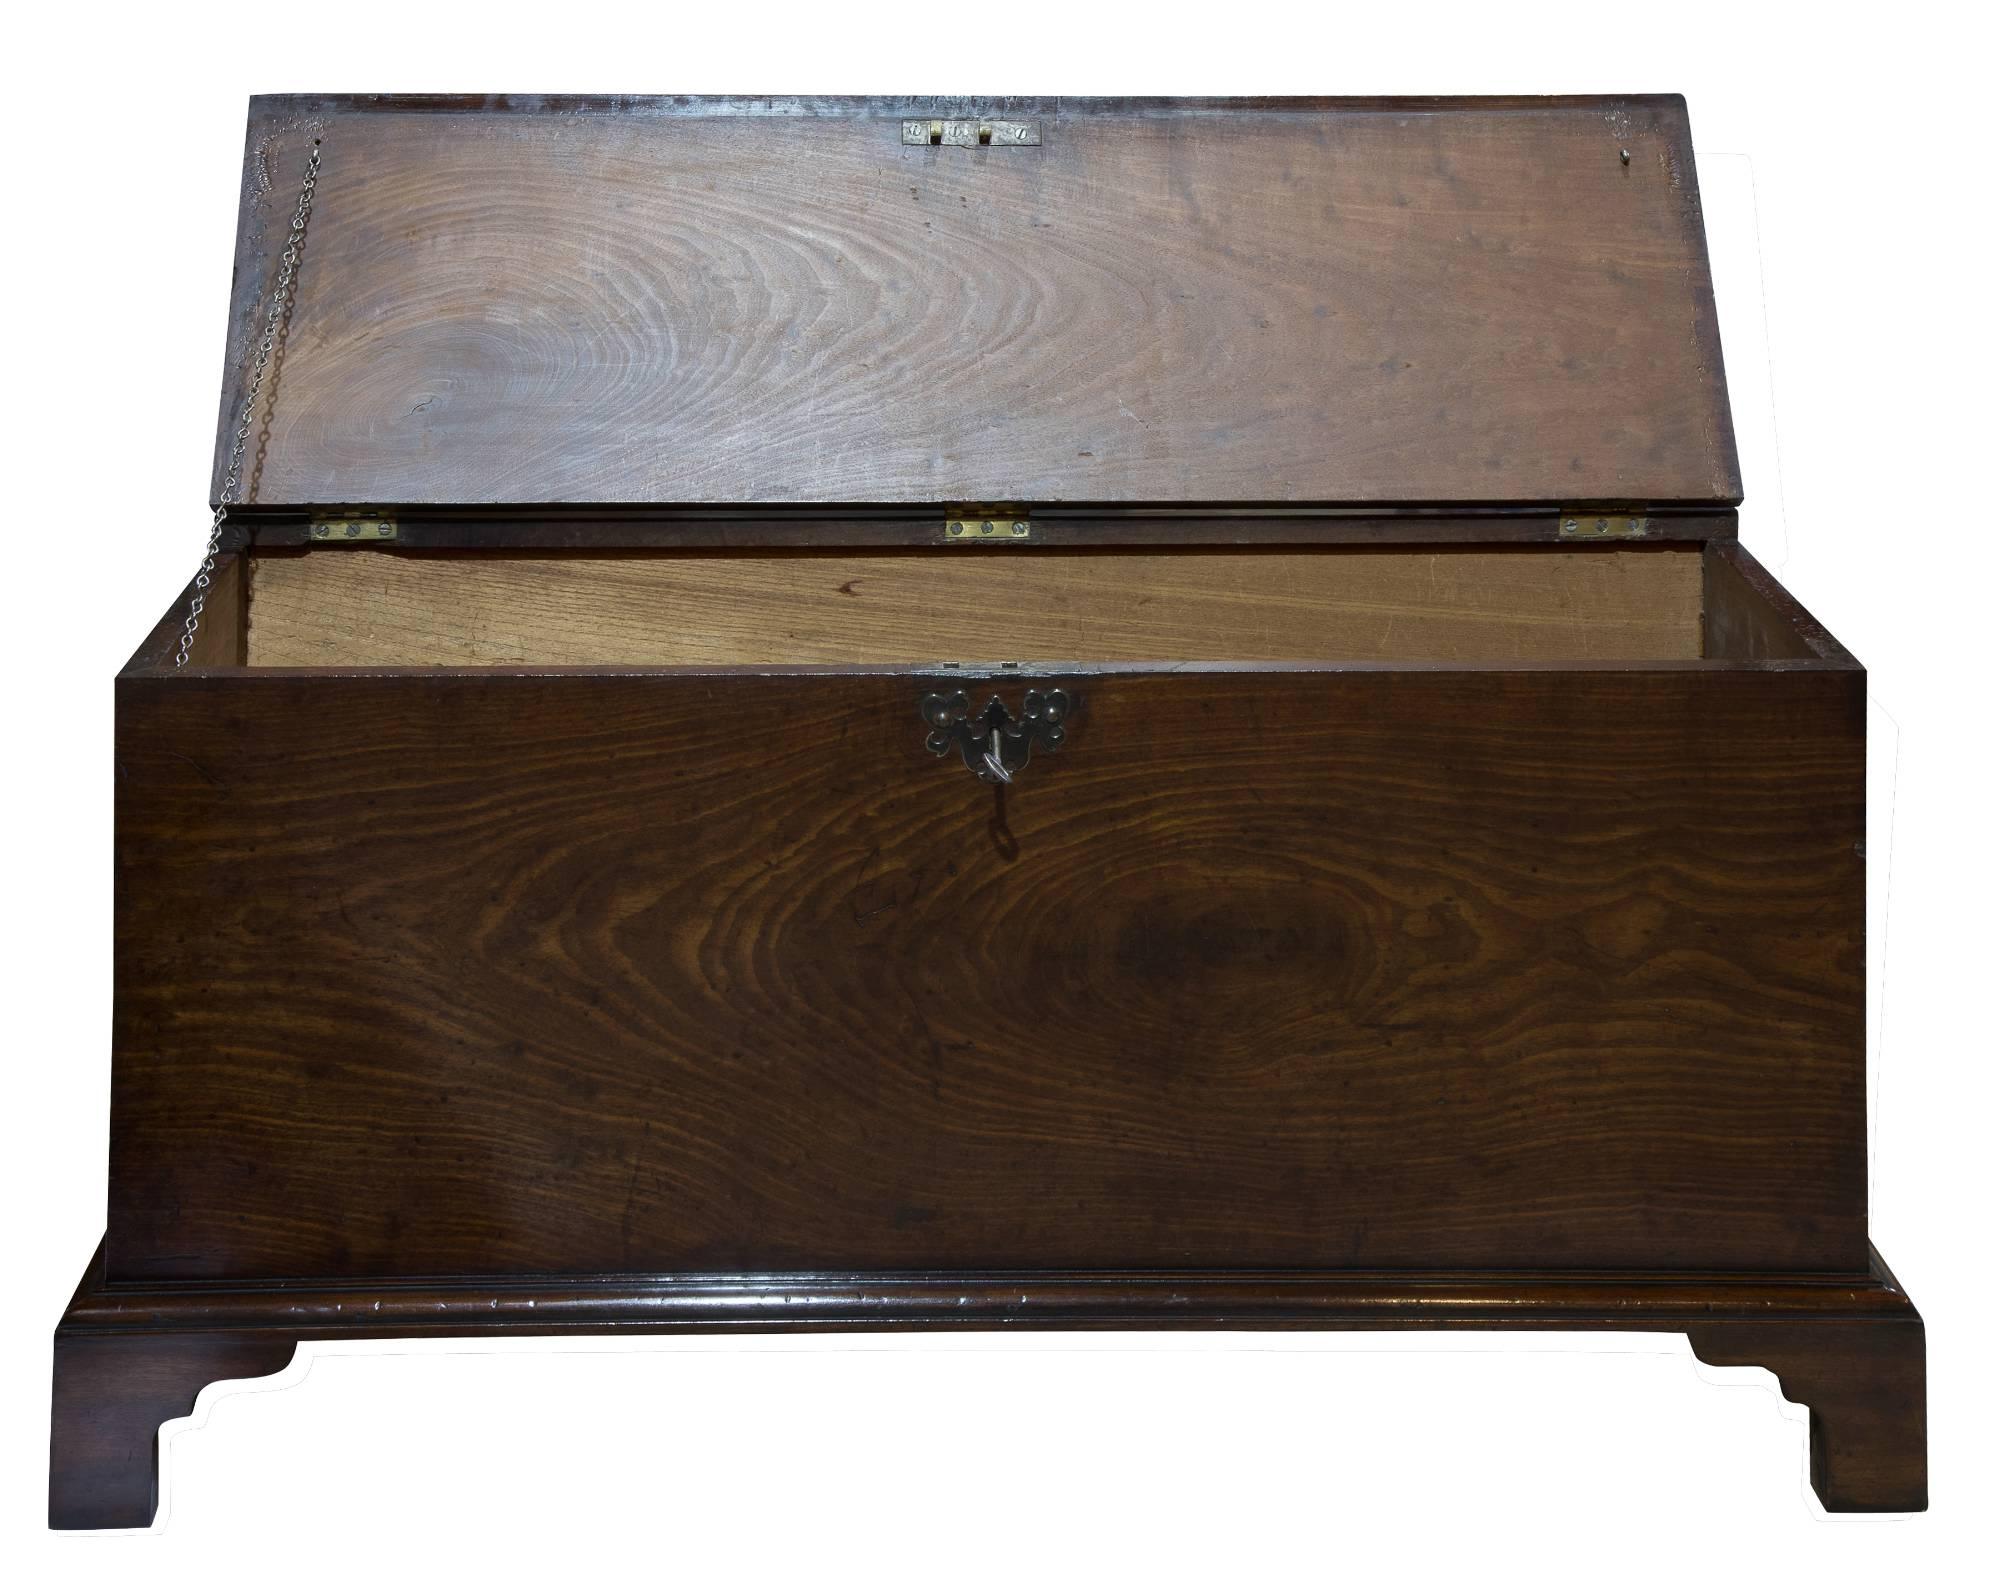 A fantastic mahogany Trunk or deed chest, superb colour. Original carry handles, stamped W.S Pryor 1846

With key.